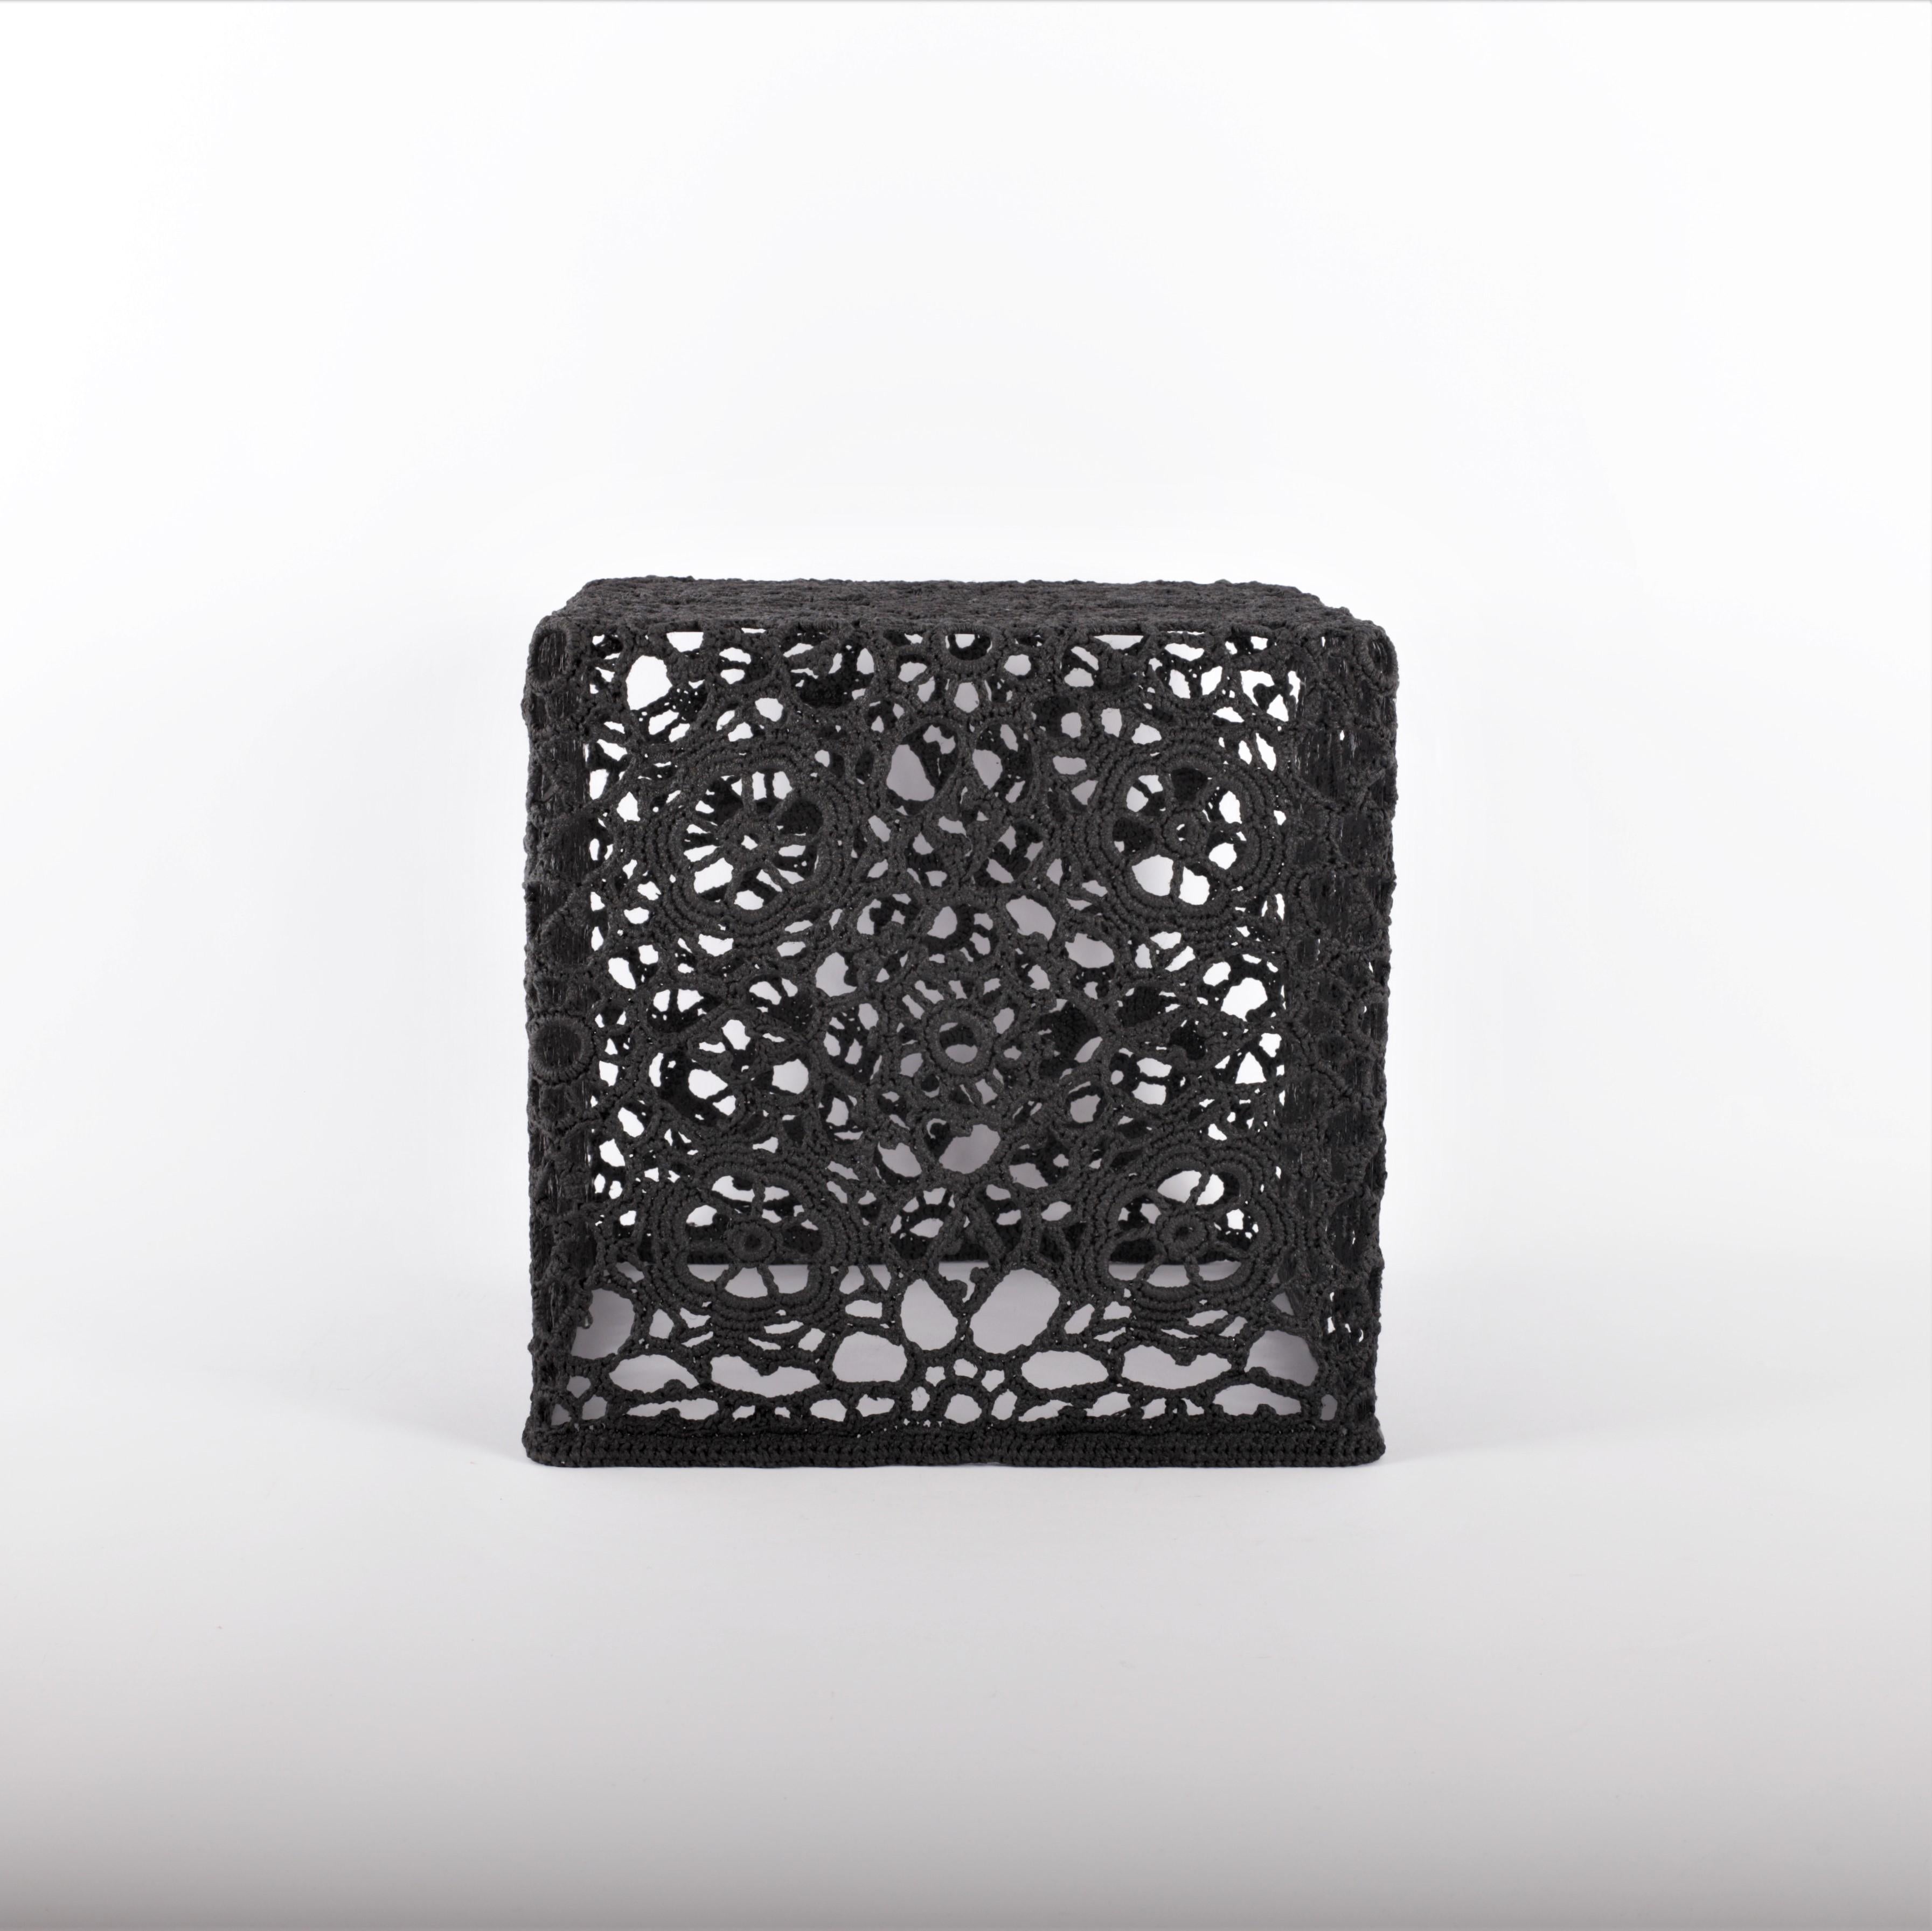 Crochet Side Table, Special Black 3, by Marcel Wanders, 2007 In New Condition For Sale In Amsterdam, NL